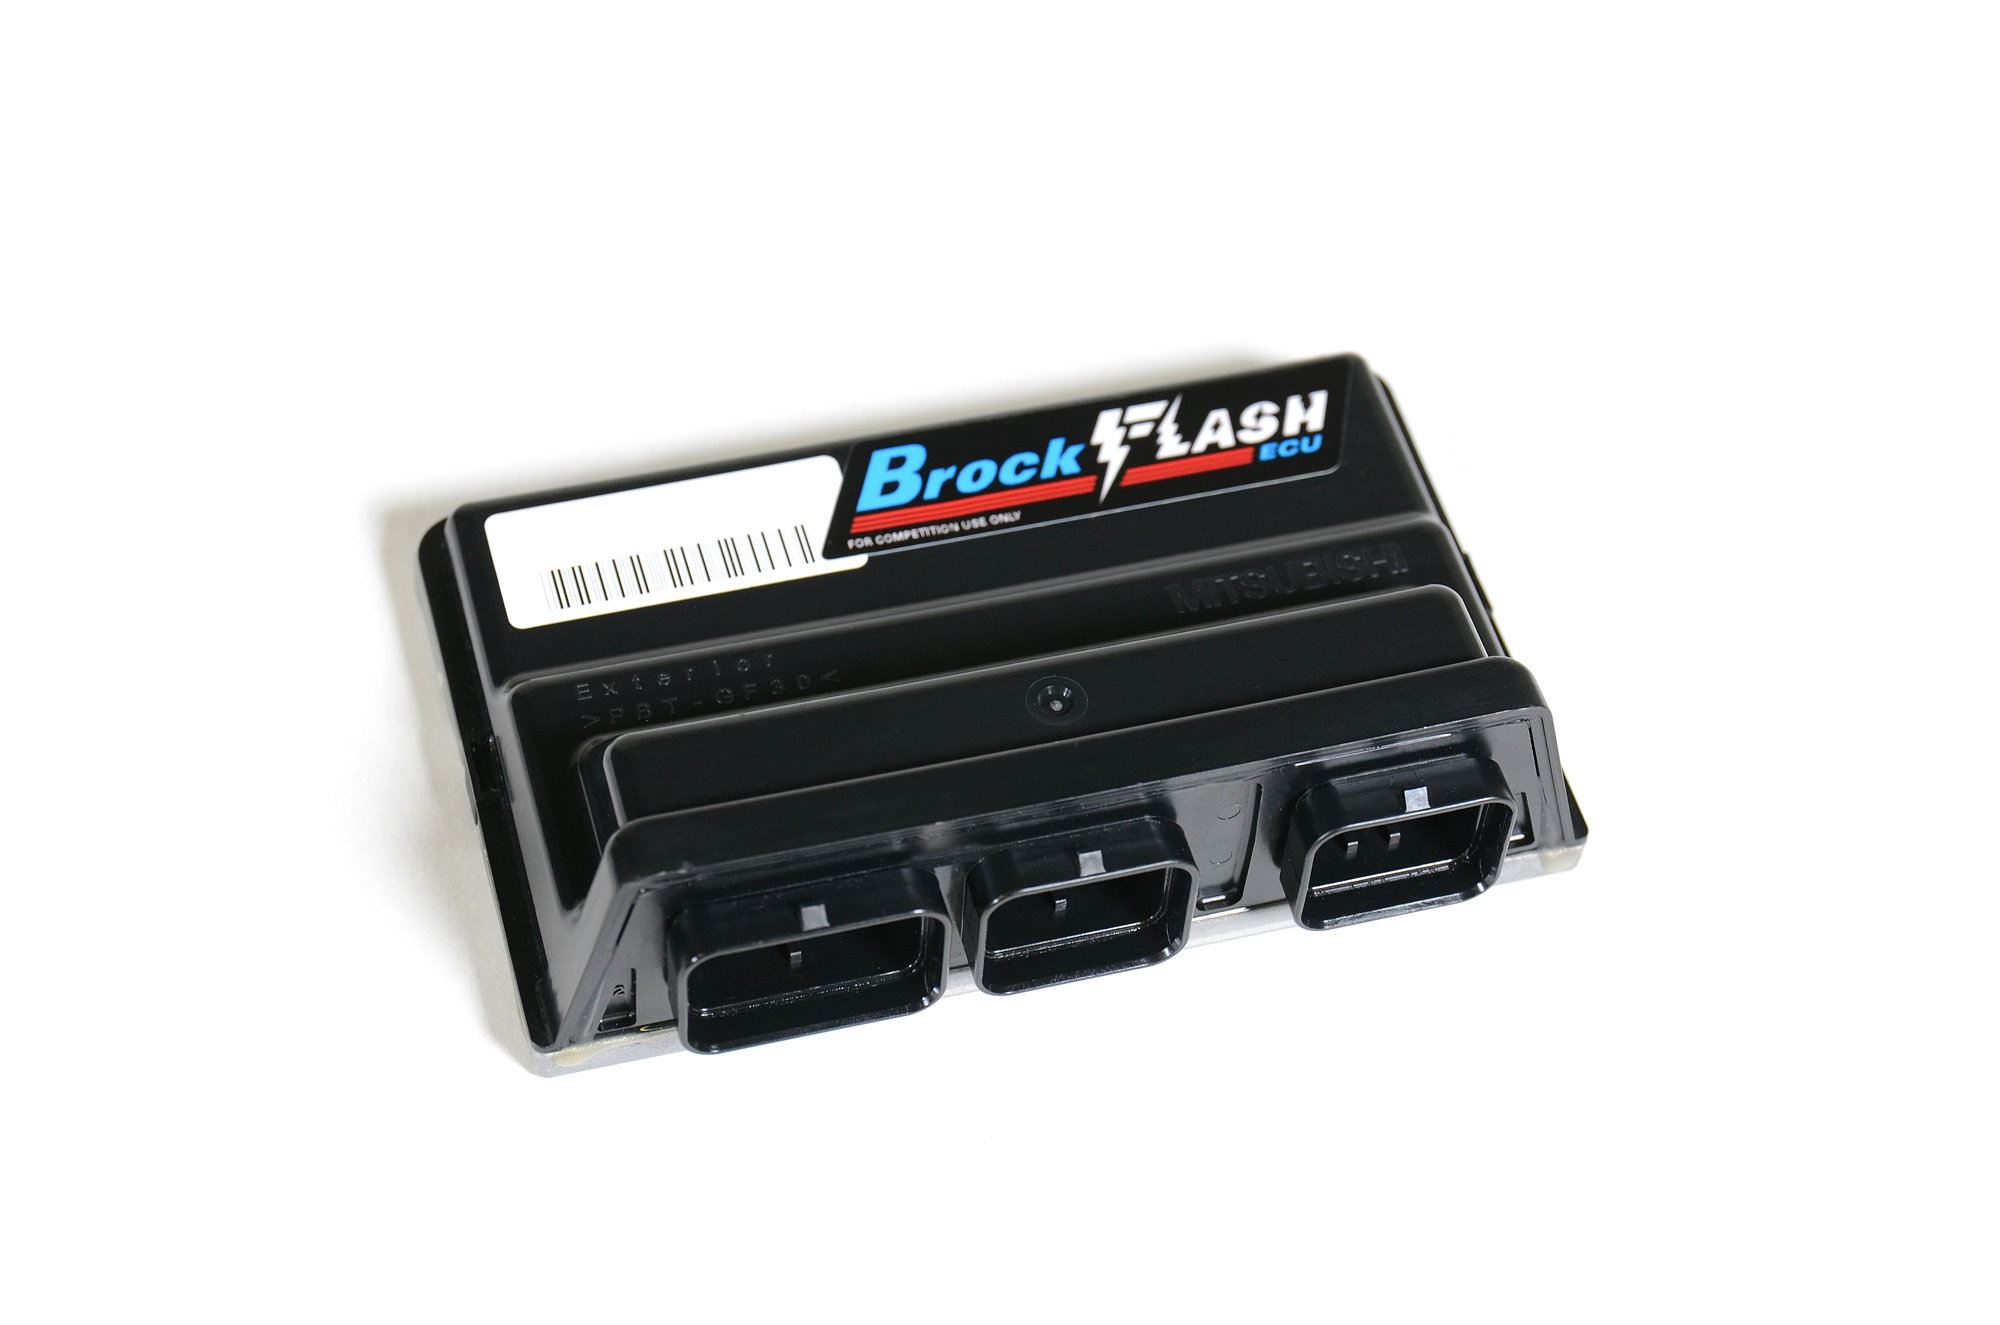 Buy BrockFLASH ECU Stage 1-F With Fuel Tune (For 3/4 Cat Delete) ZX-10R (19-20) Must Send Us Your ECU SKU: 924487 at the price of US$ 399 | BrocksPerformance.com